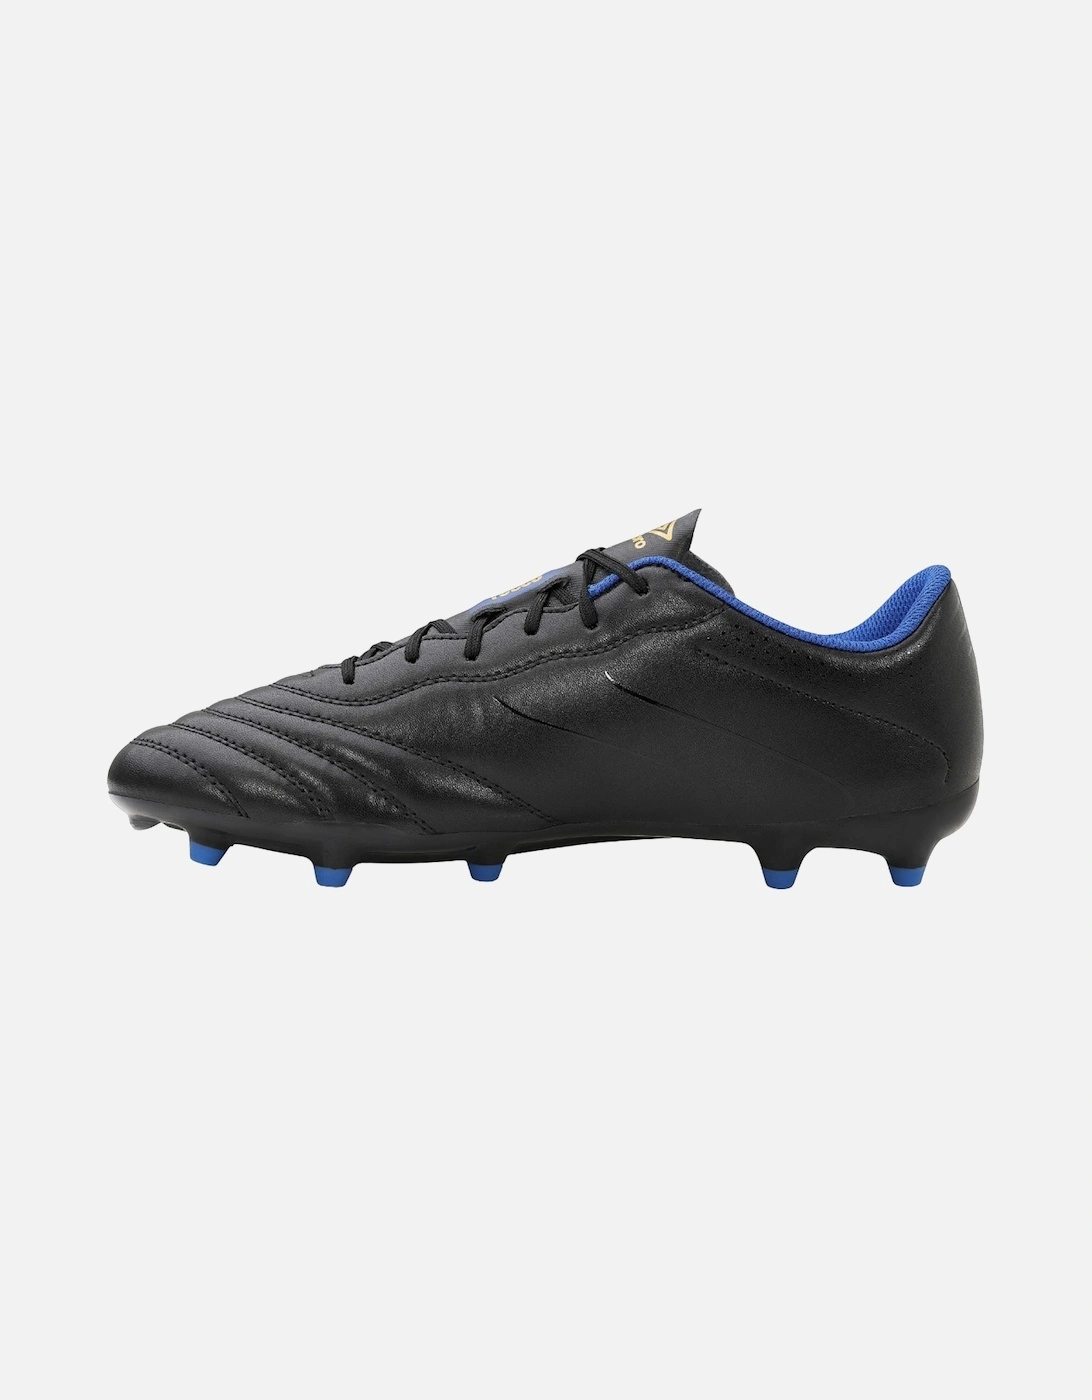 Mens Tocco III Club Leather Football Boots